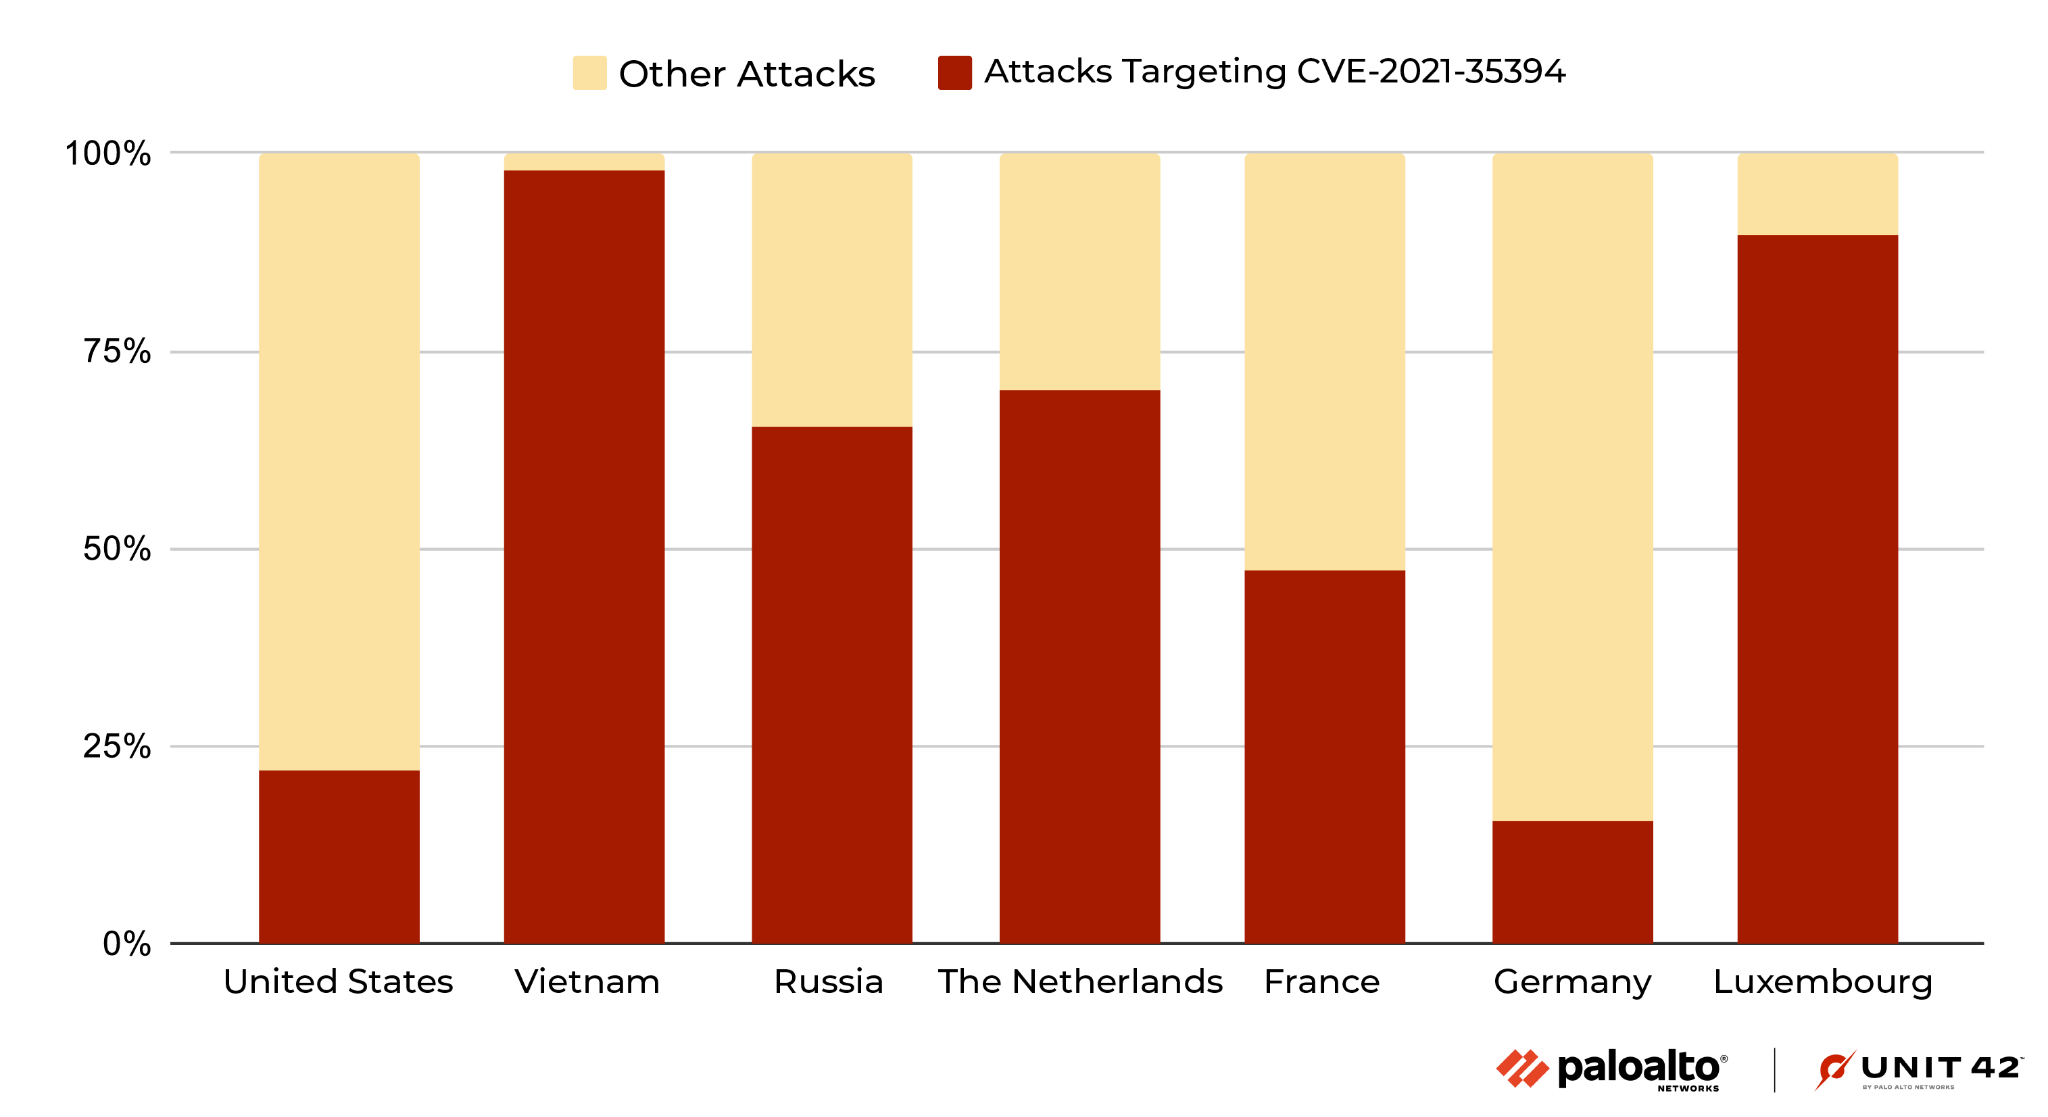 Image 6 is a stacked bar chart comparing the total overall attacks to attacks targeting CVE-2021-35394. 